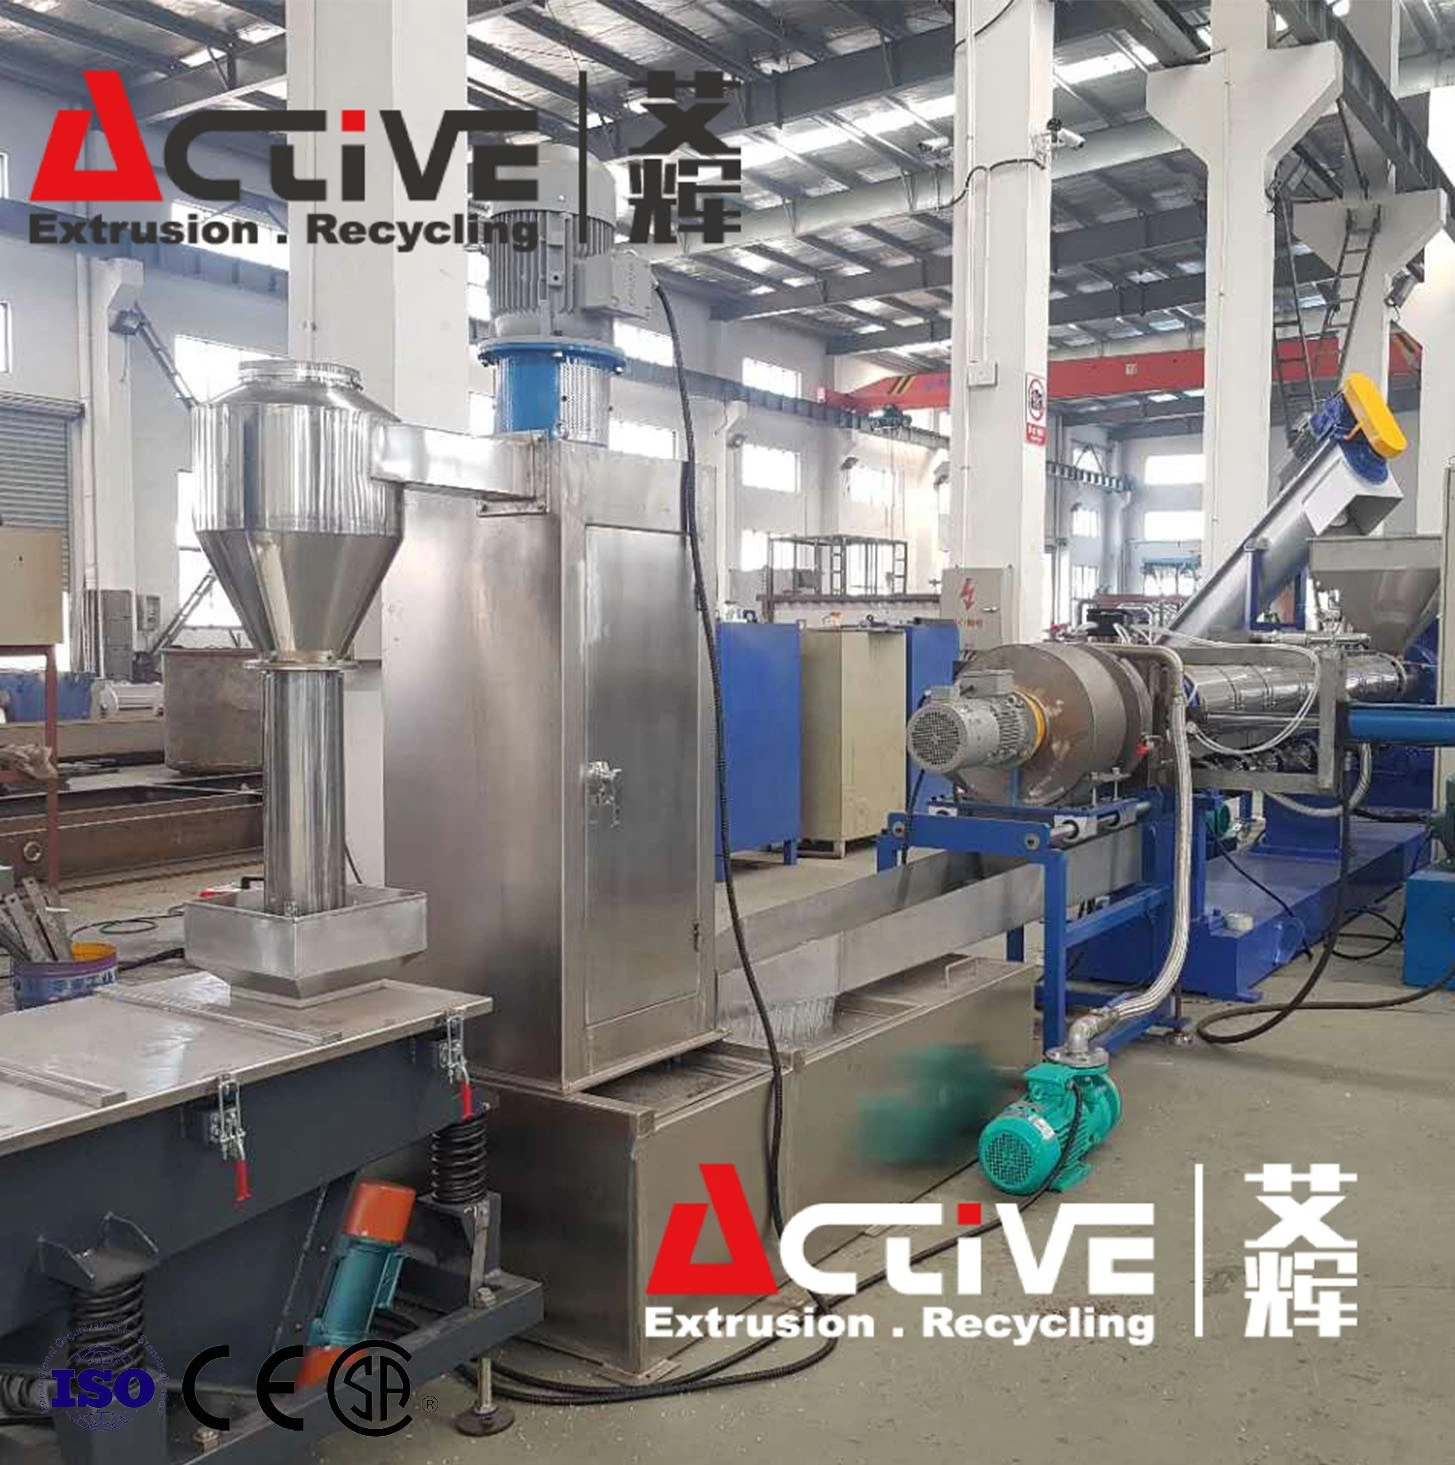 Waste Plastic PET Bottles Recycling Machine Line For Sale